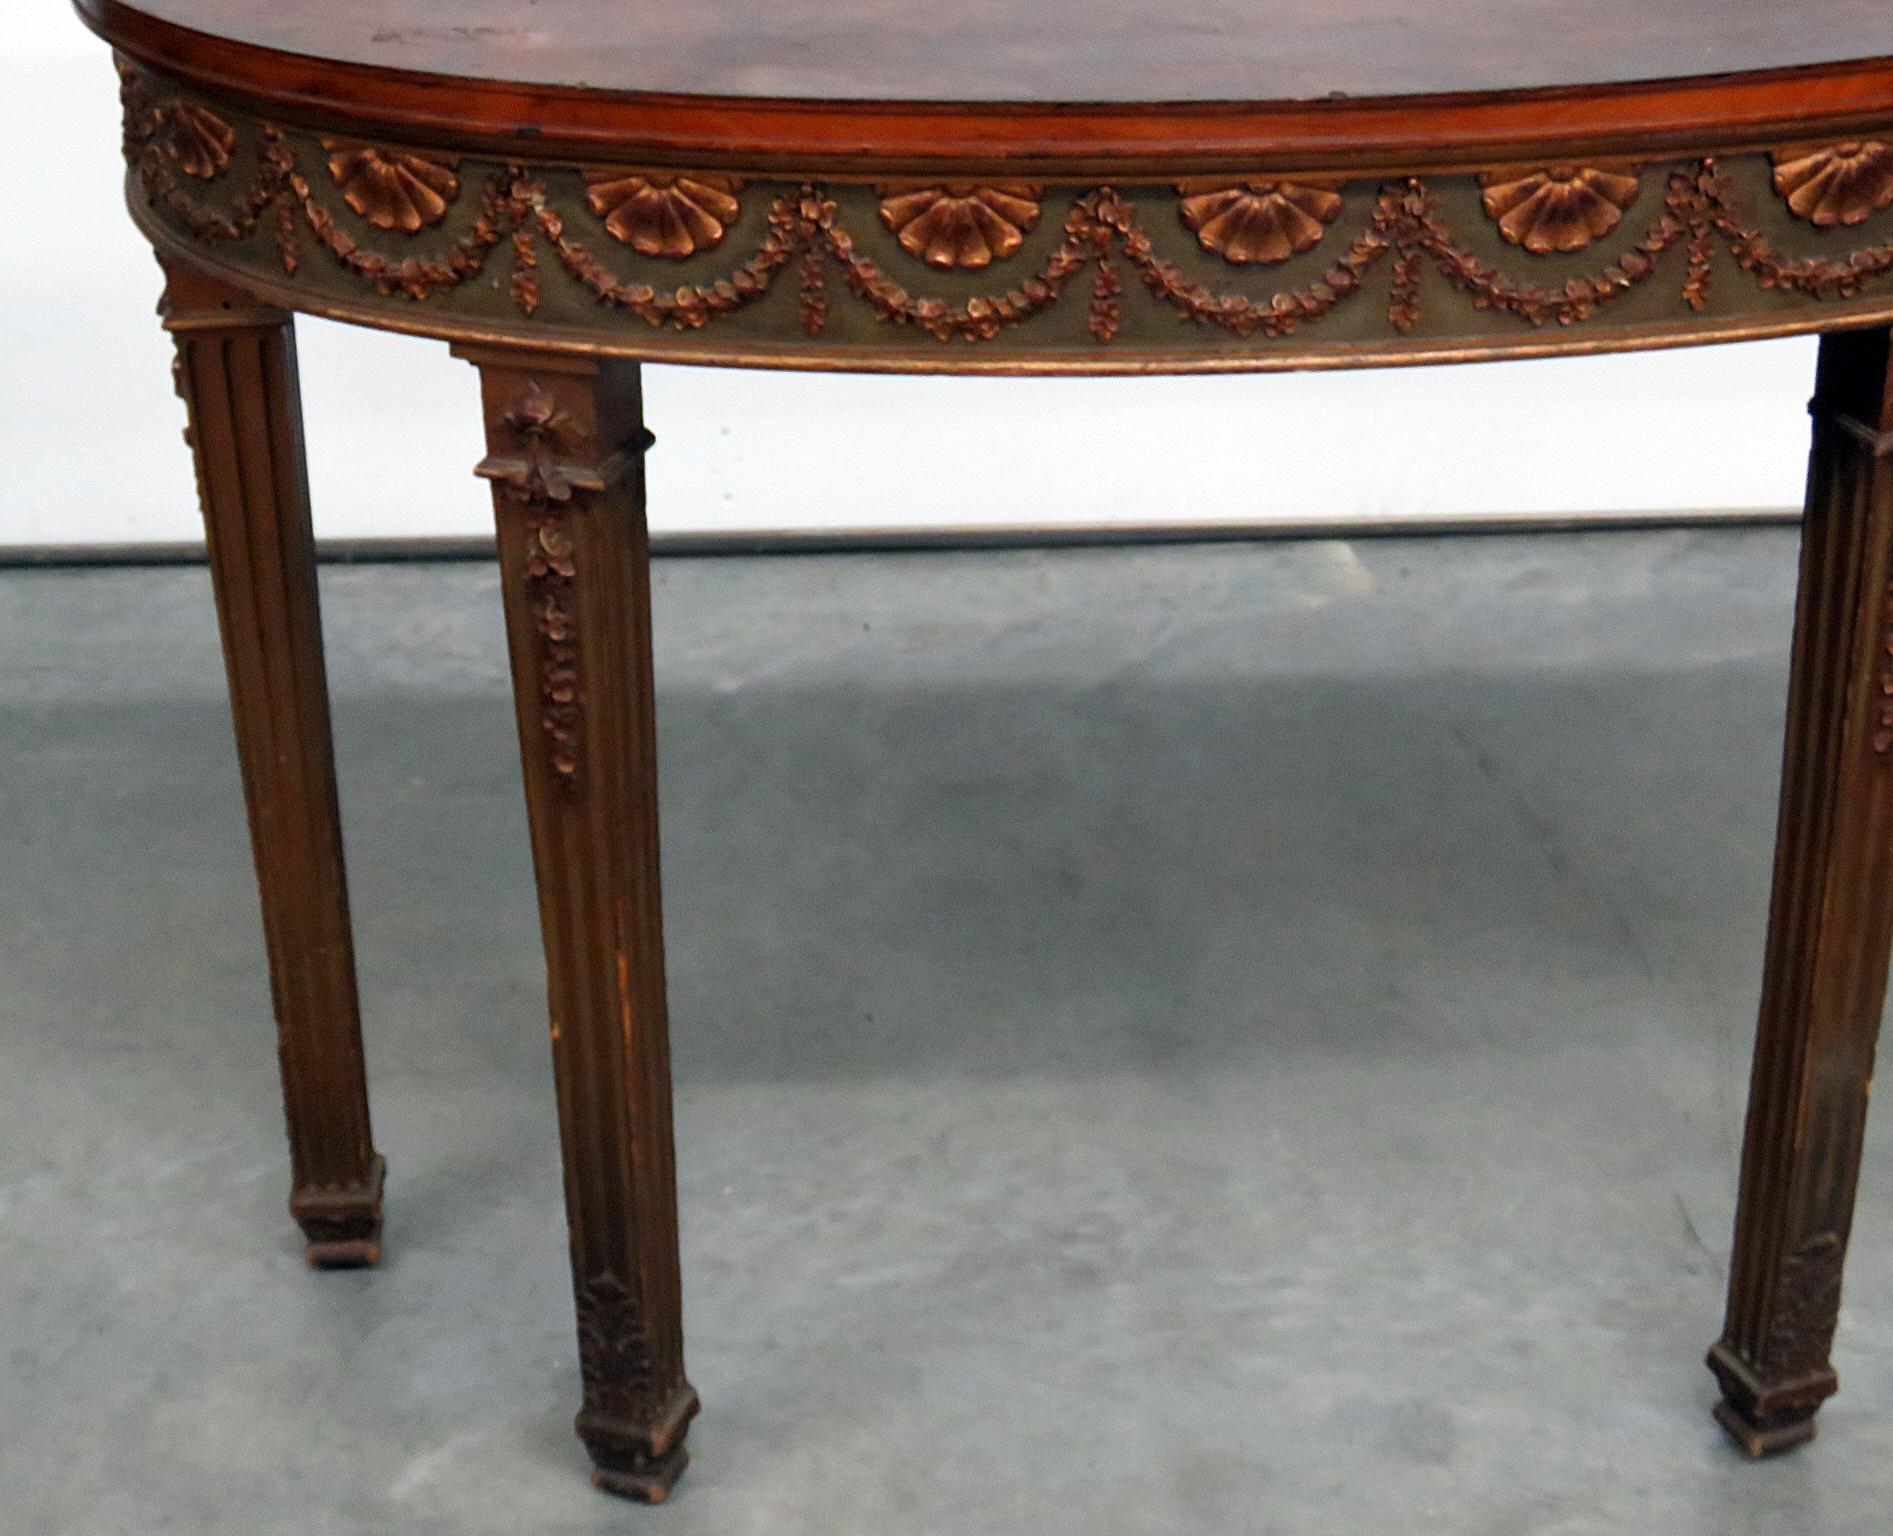 Adams style distressed finished demilune console table with gilt accents.